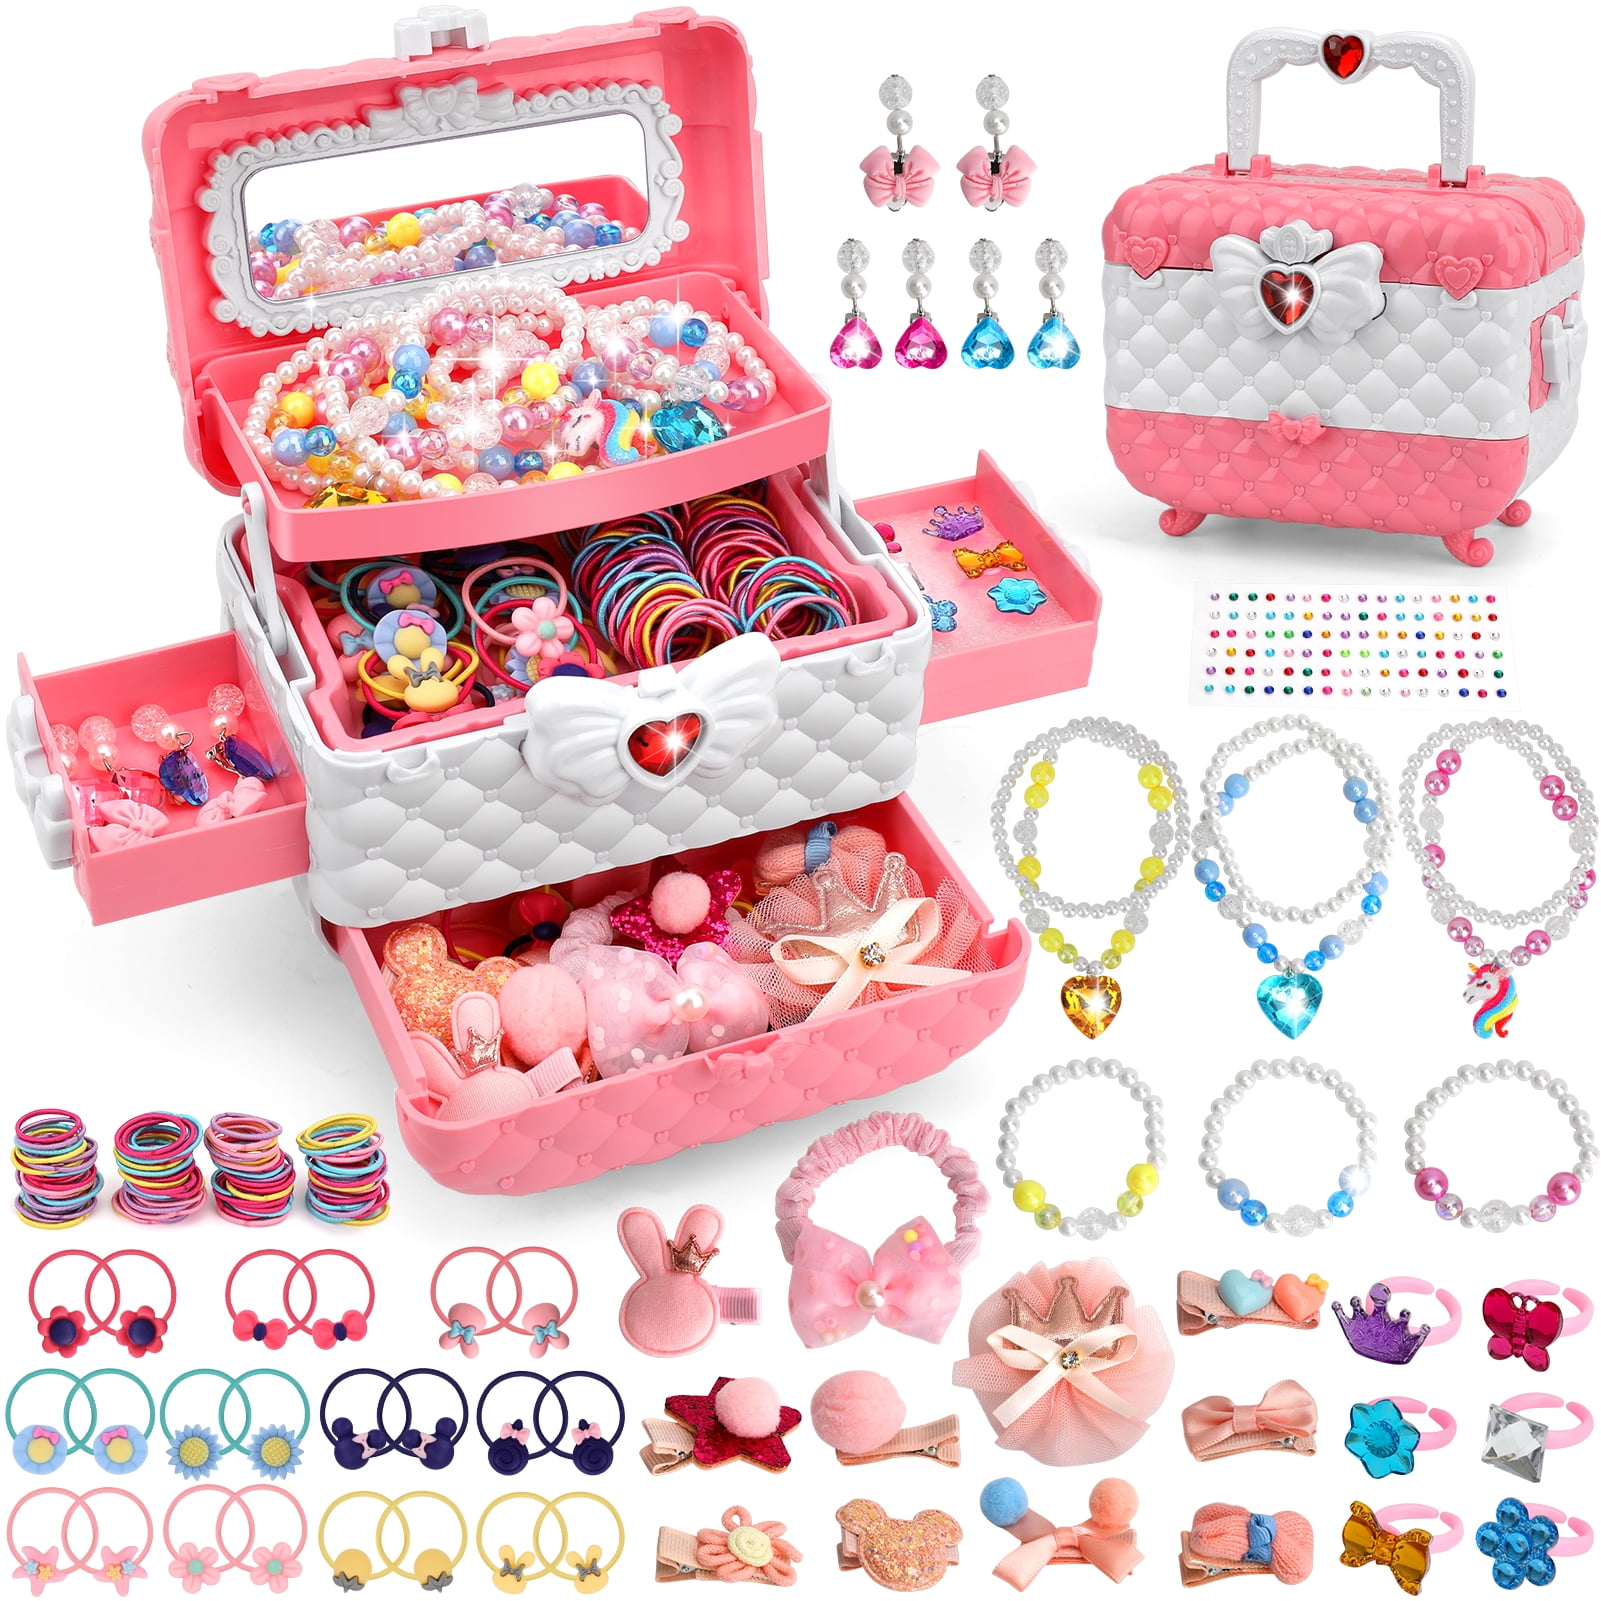 Flybay Kids Jewelry for Girls, Toys for Girls Ages 3 4 5 6 7 8 9 10 ...